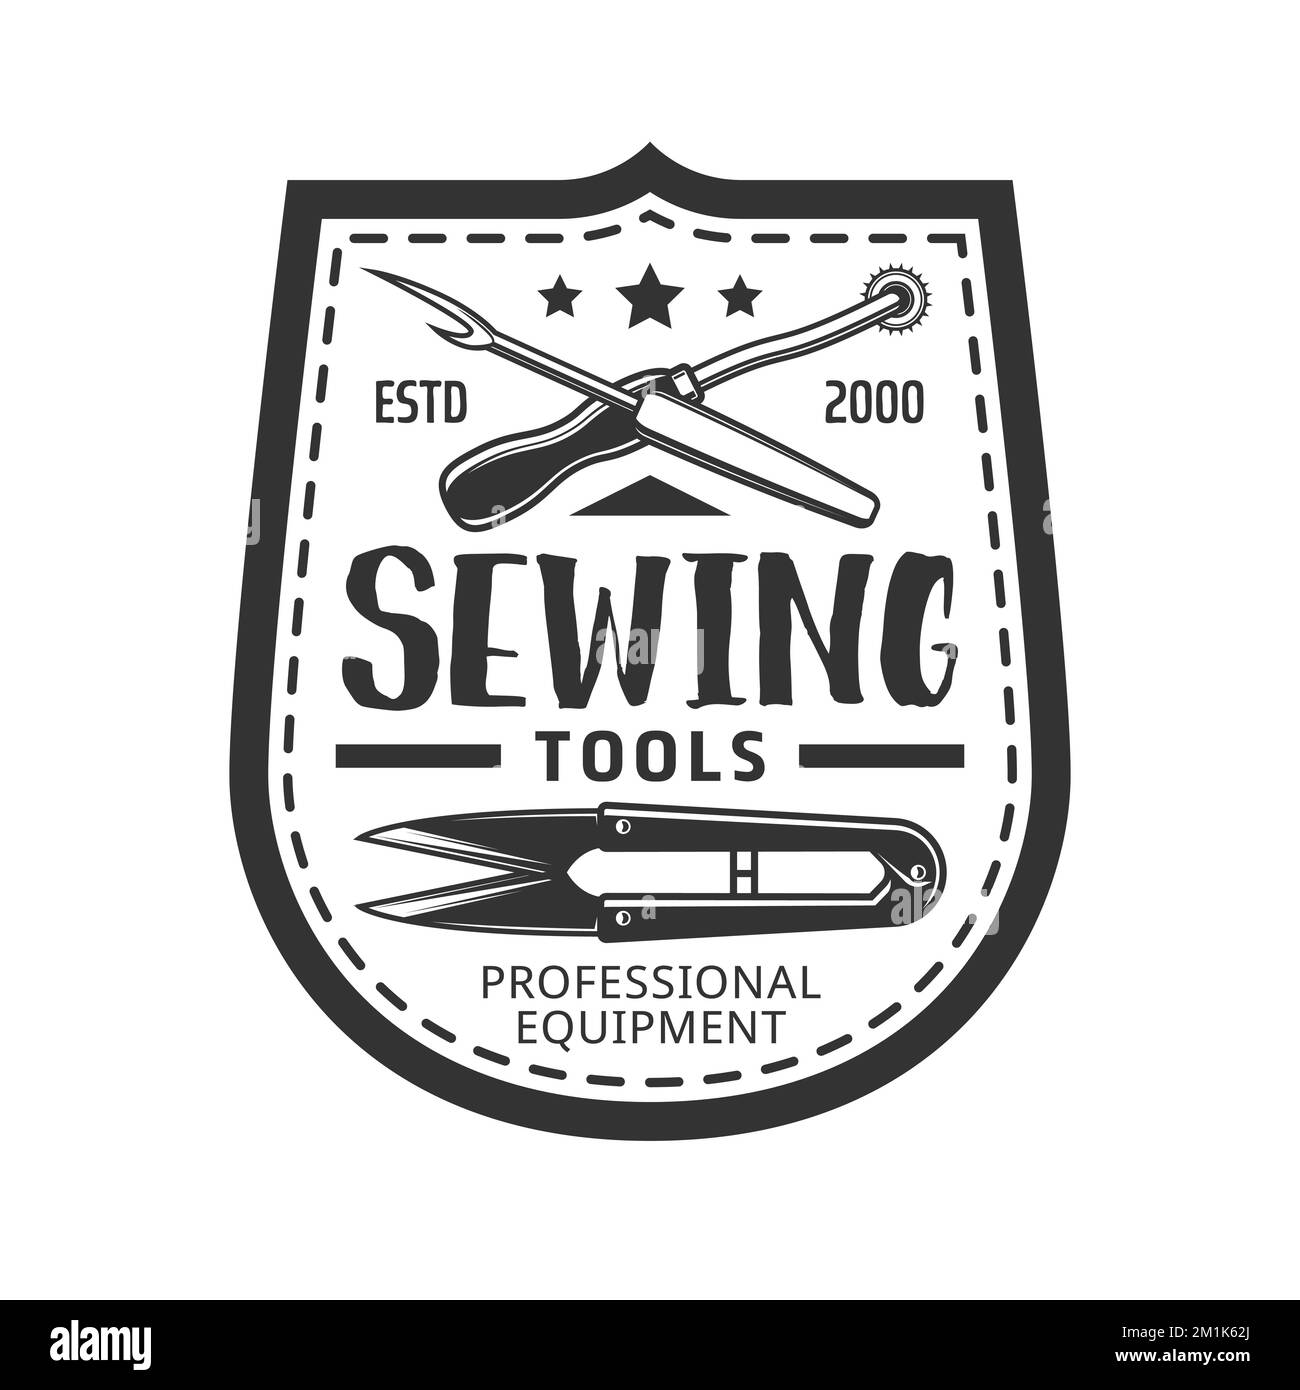 Sewing tools icon or retro symbol with scissors, seam ripper or thread cutter, leather pattern tracing wheel. Tailor or dressmaker tools shop or store vector badge or monochrome icon Stock Vector